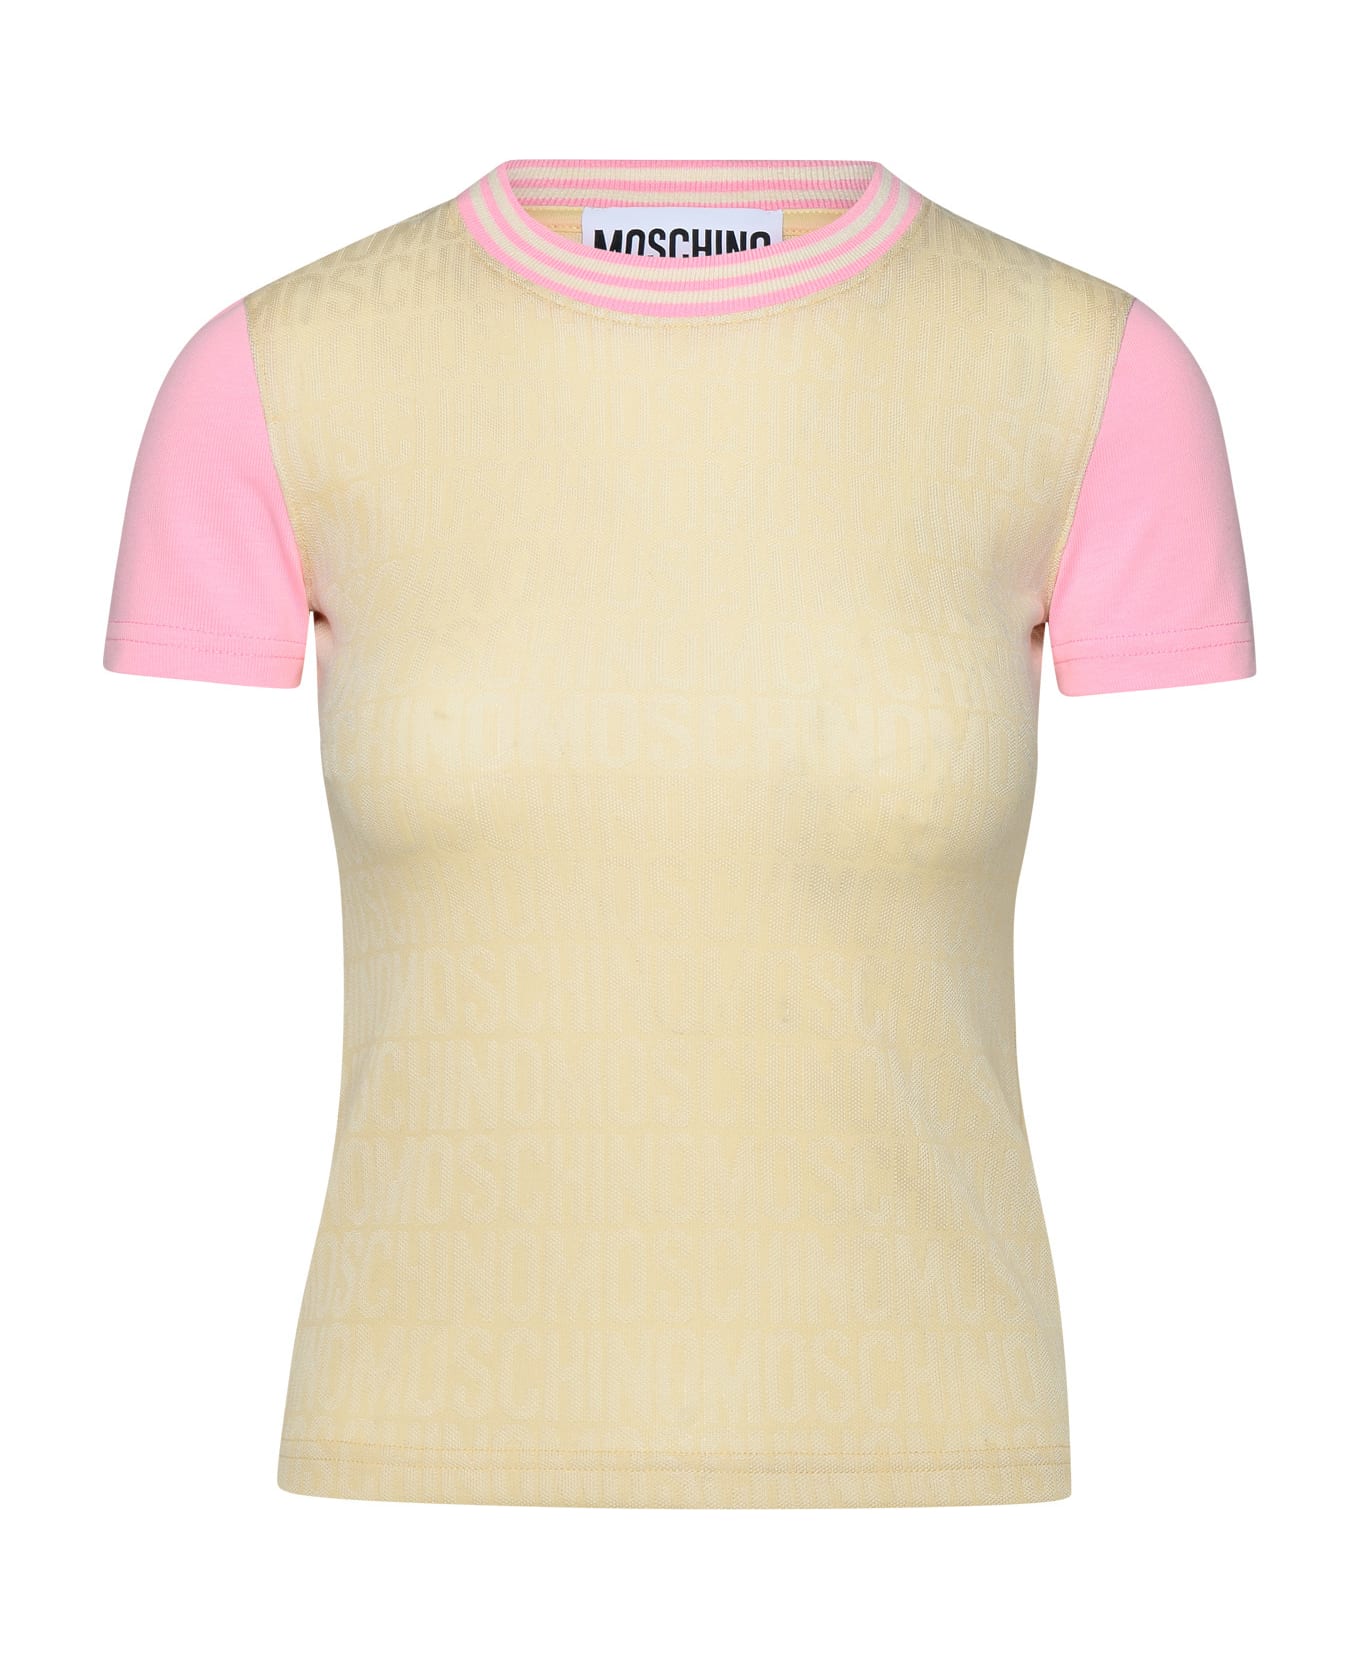 Moschino Multicolor Cotton Blend T-shirt - Ivory